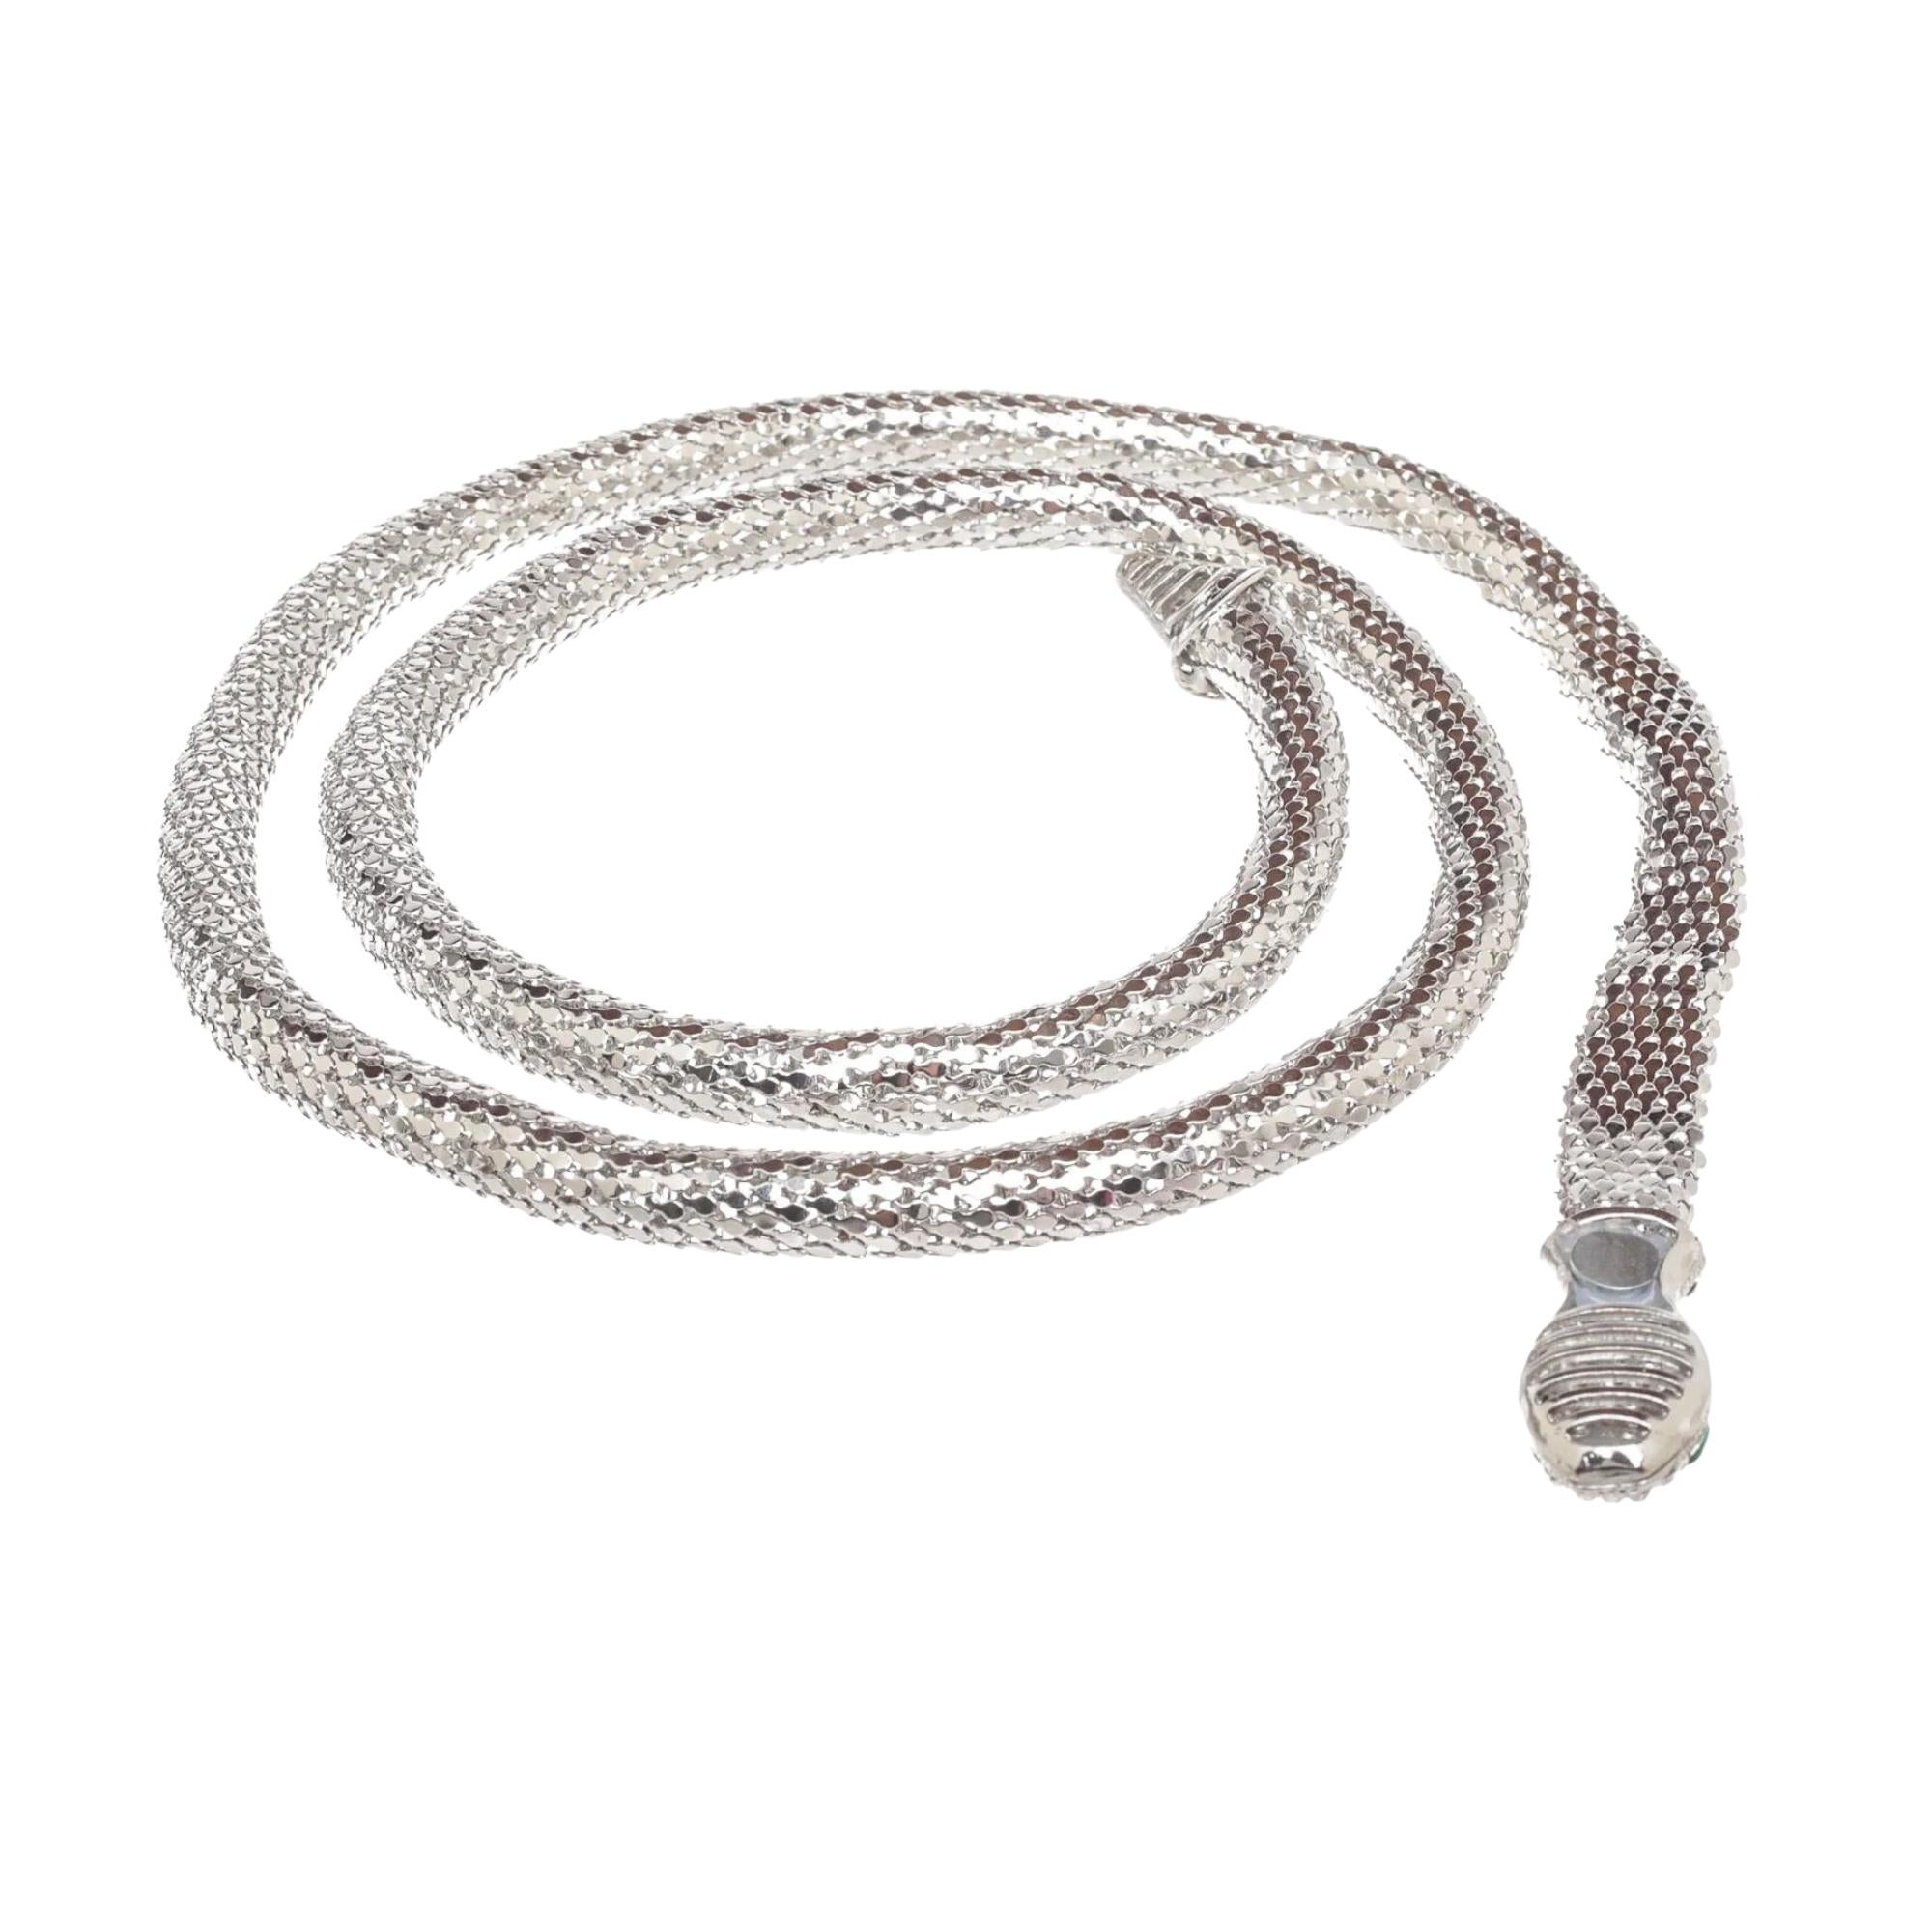 Edgy snake-inspired choker encrusted with crystals. Silver tone metal. Glass. Slip-on style.
 
Color: Silver tone
Material: Silver plated brass
Marks: Brand mark
Slip-on style
Year: Circa 2020
Condition: Very good. Item is pristine.

Made in Italy